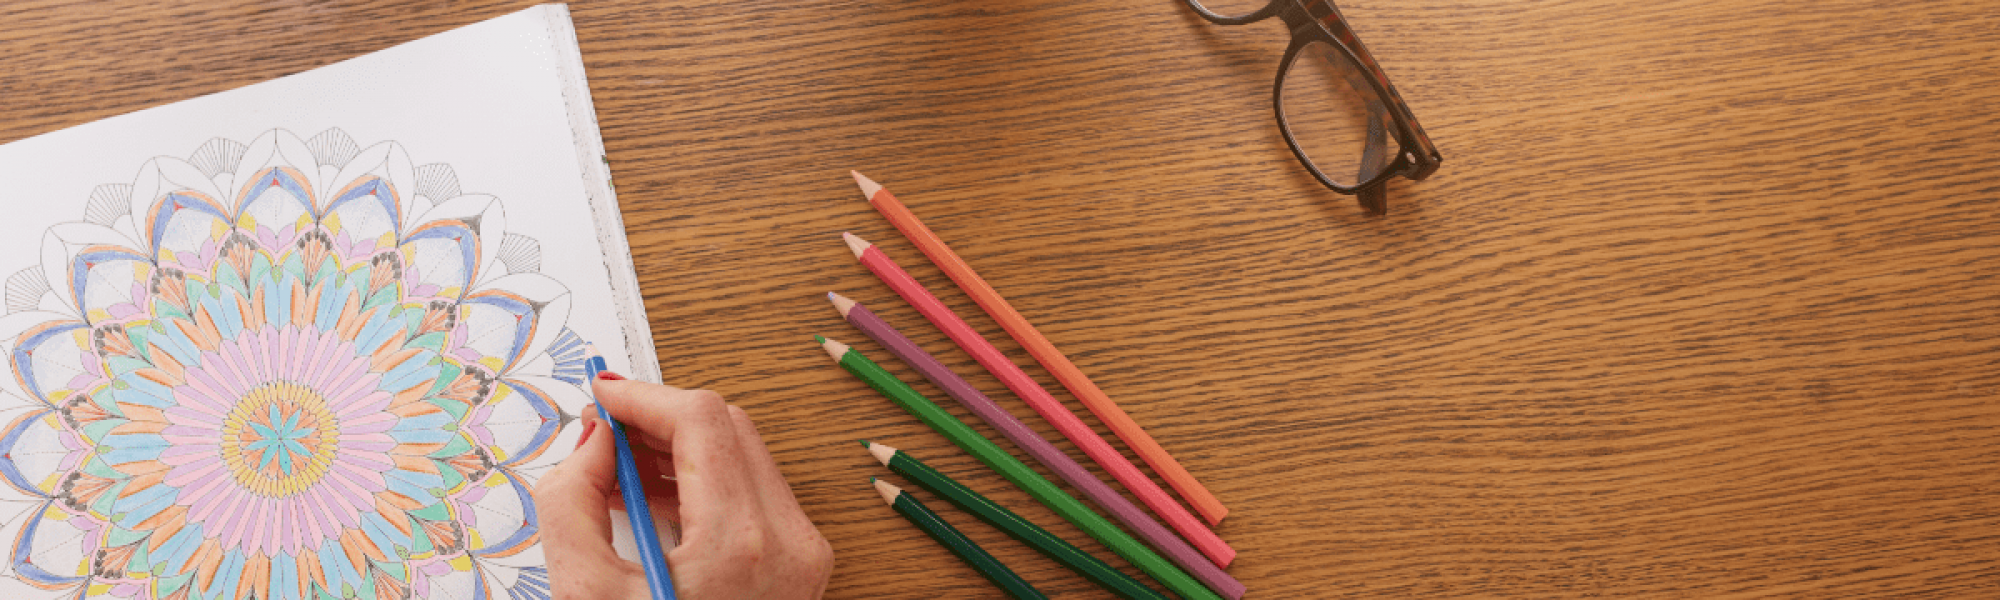 female hand coloring with colored pencils on a wooden table glasses